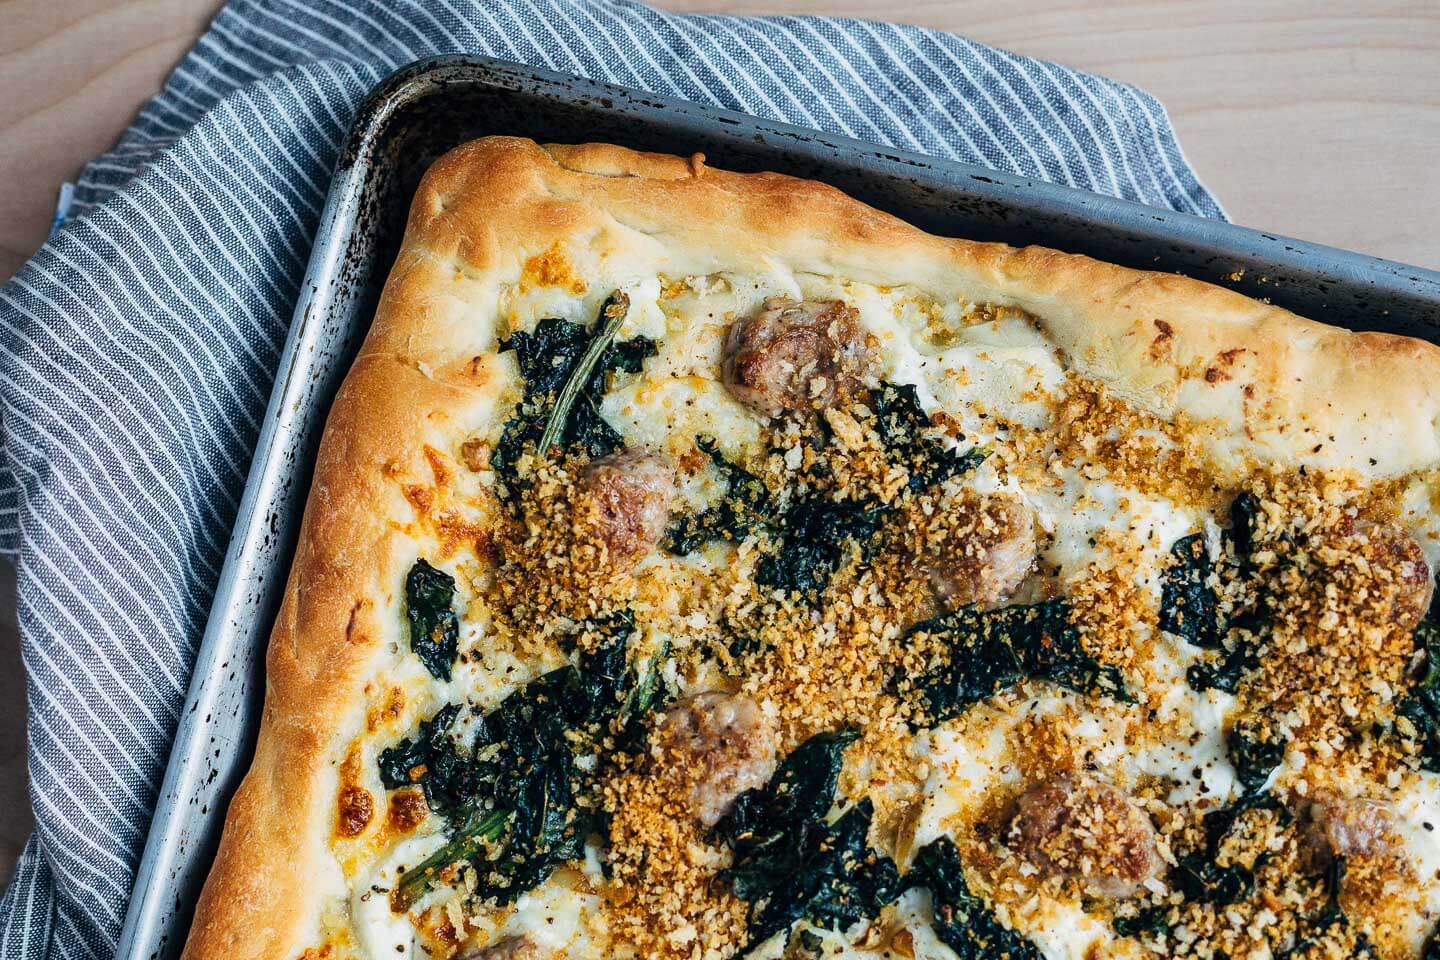 sausage and greens grandma-style pizza with toasted breadcrumbs // brooklyn supper